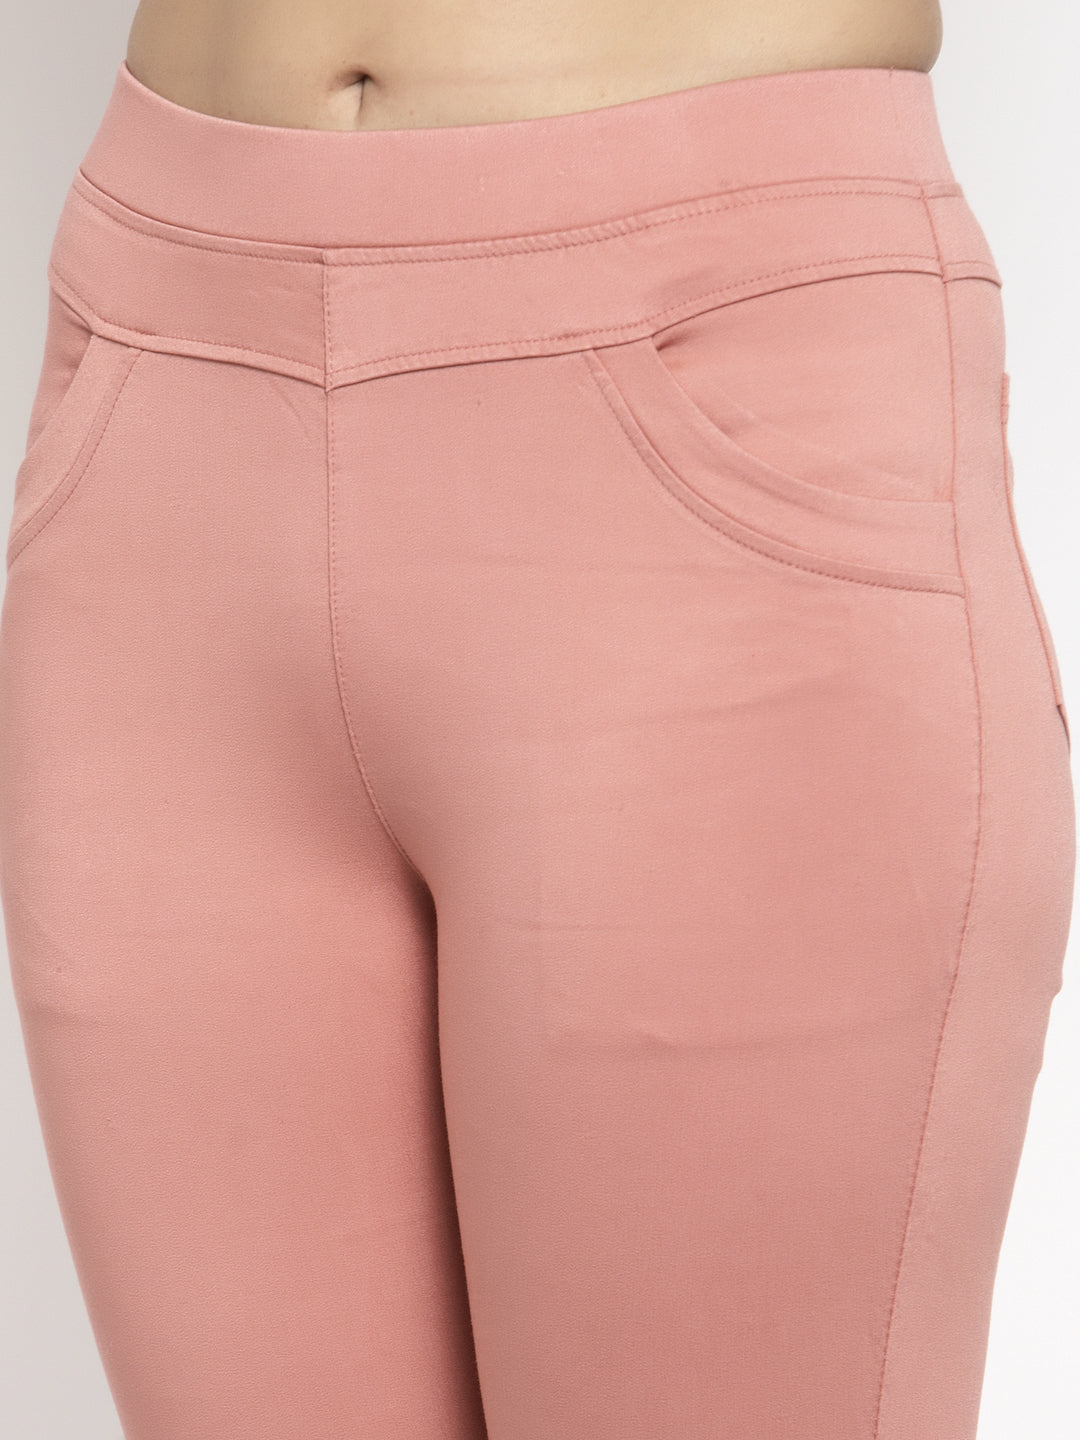 Women Lotus Pink  Mid-Rise Stretchable Jegging